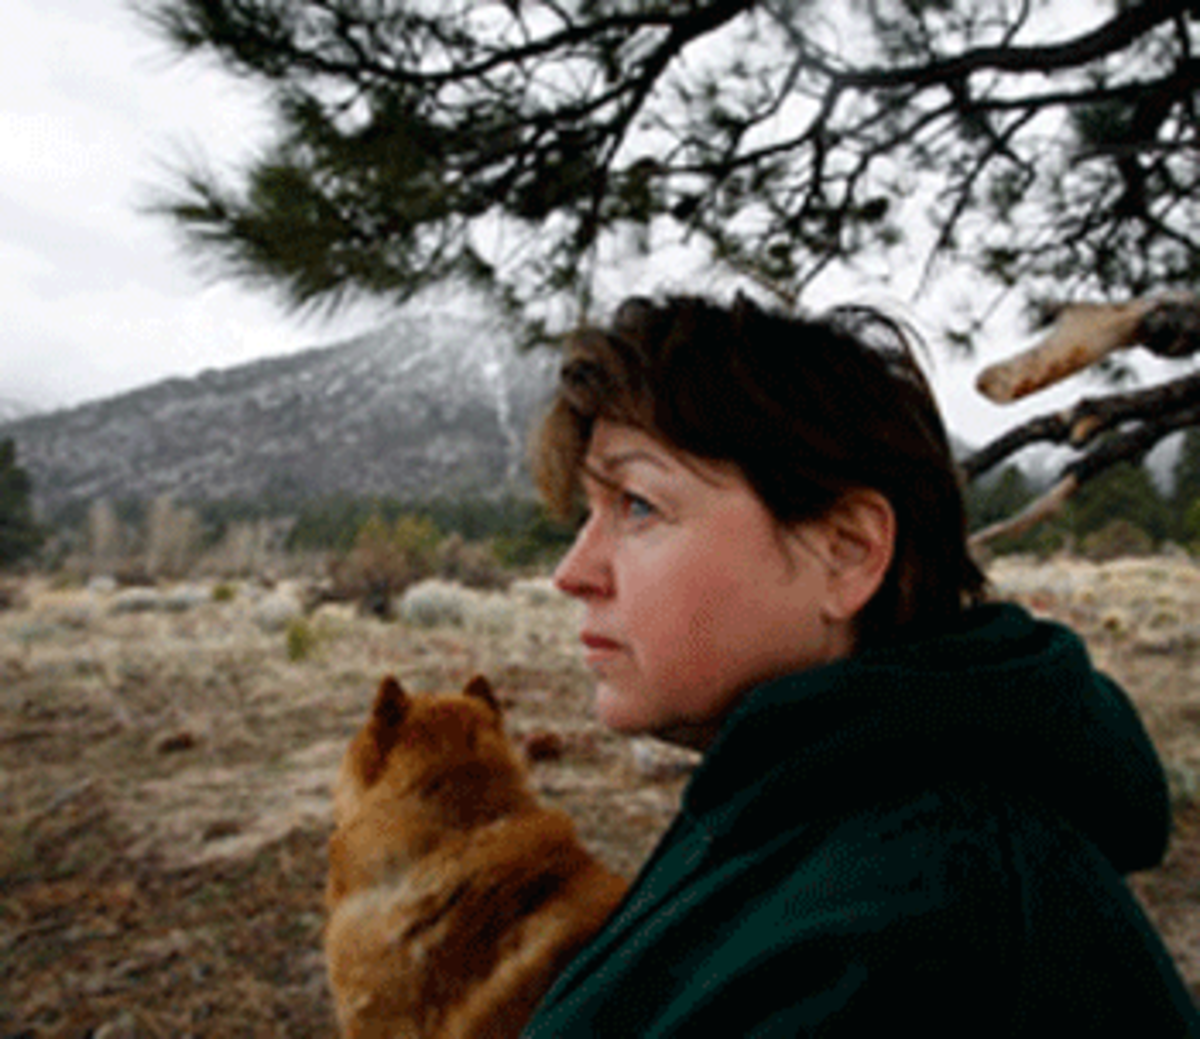 Rita Richardson of Gardnerville, Nev., rests beneath a tree as it begins to snow. She walks to a spot in the mountains near her home where she has shaped a heart in small stones. She feels connected to her late husband Rod Richardson, who was killed in Iraq when his convoy was struck by an IED on Oct. 6, 2006. (Francine Orr/ Los Angeles Times)